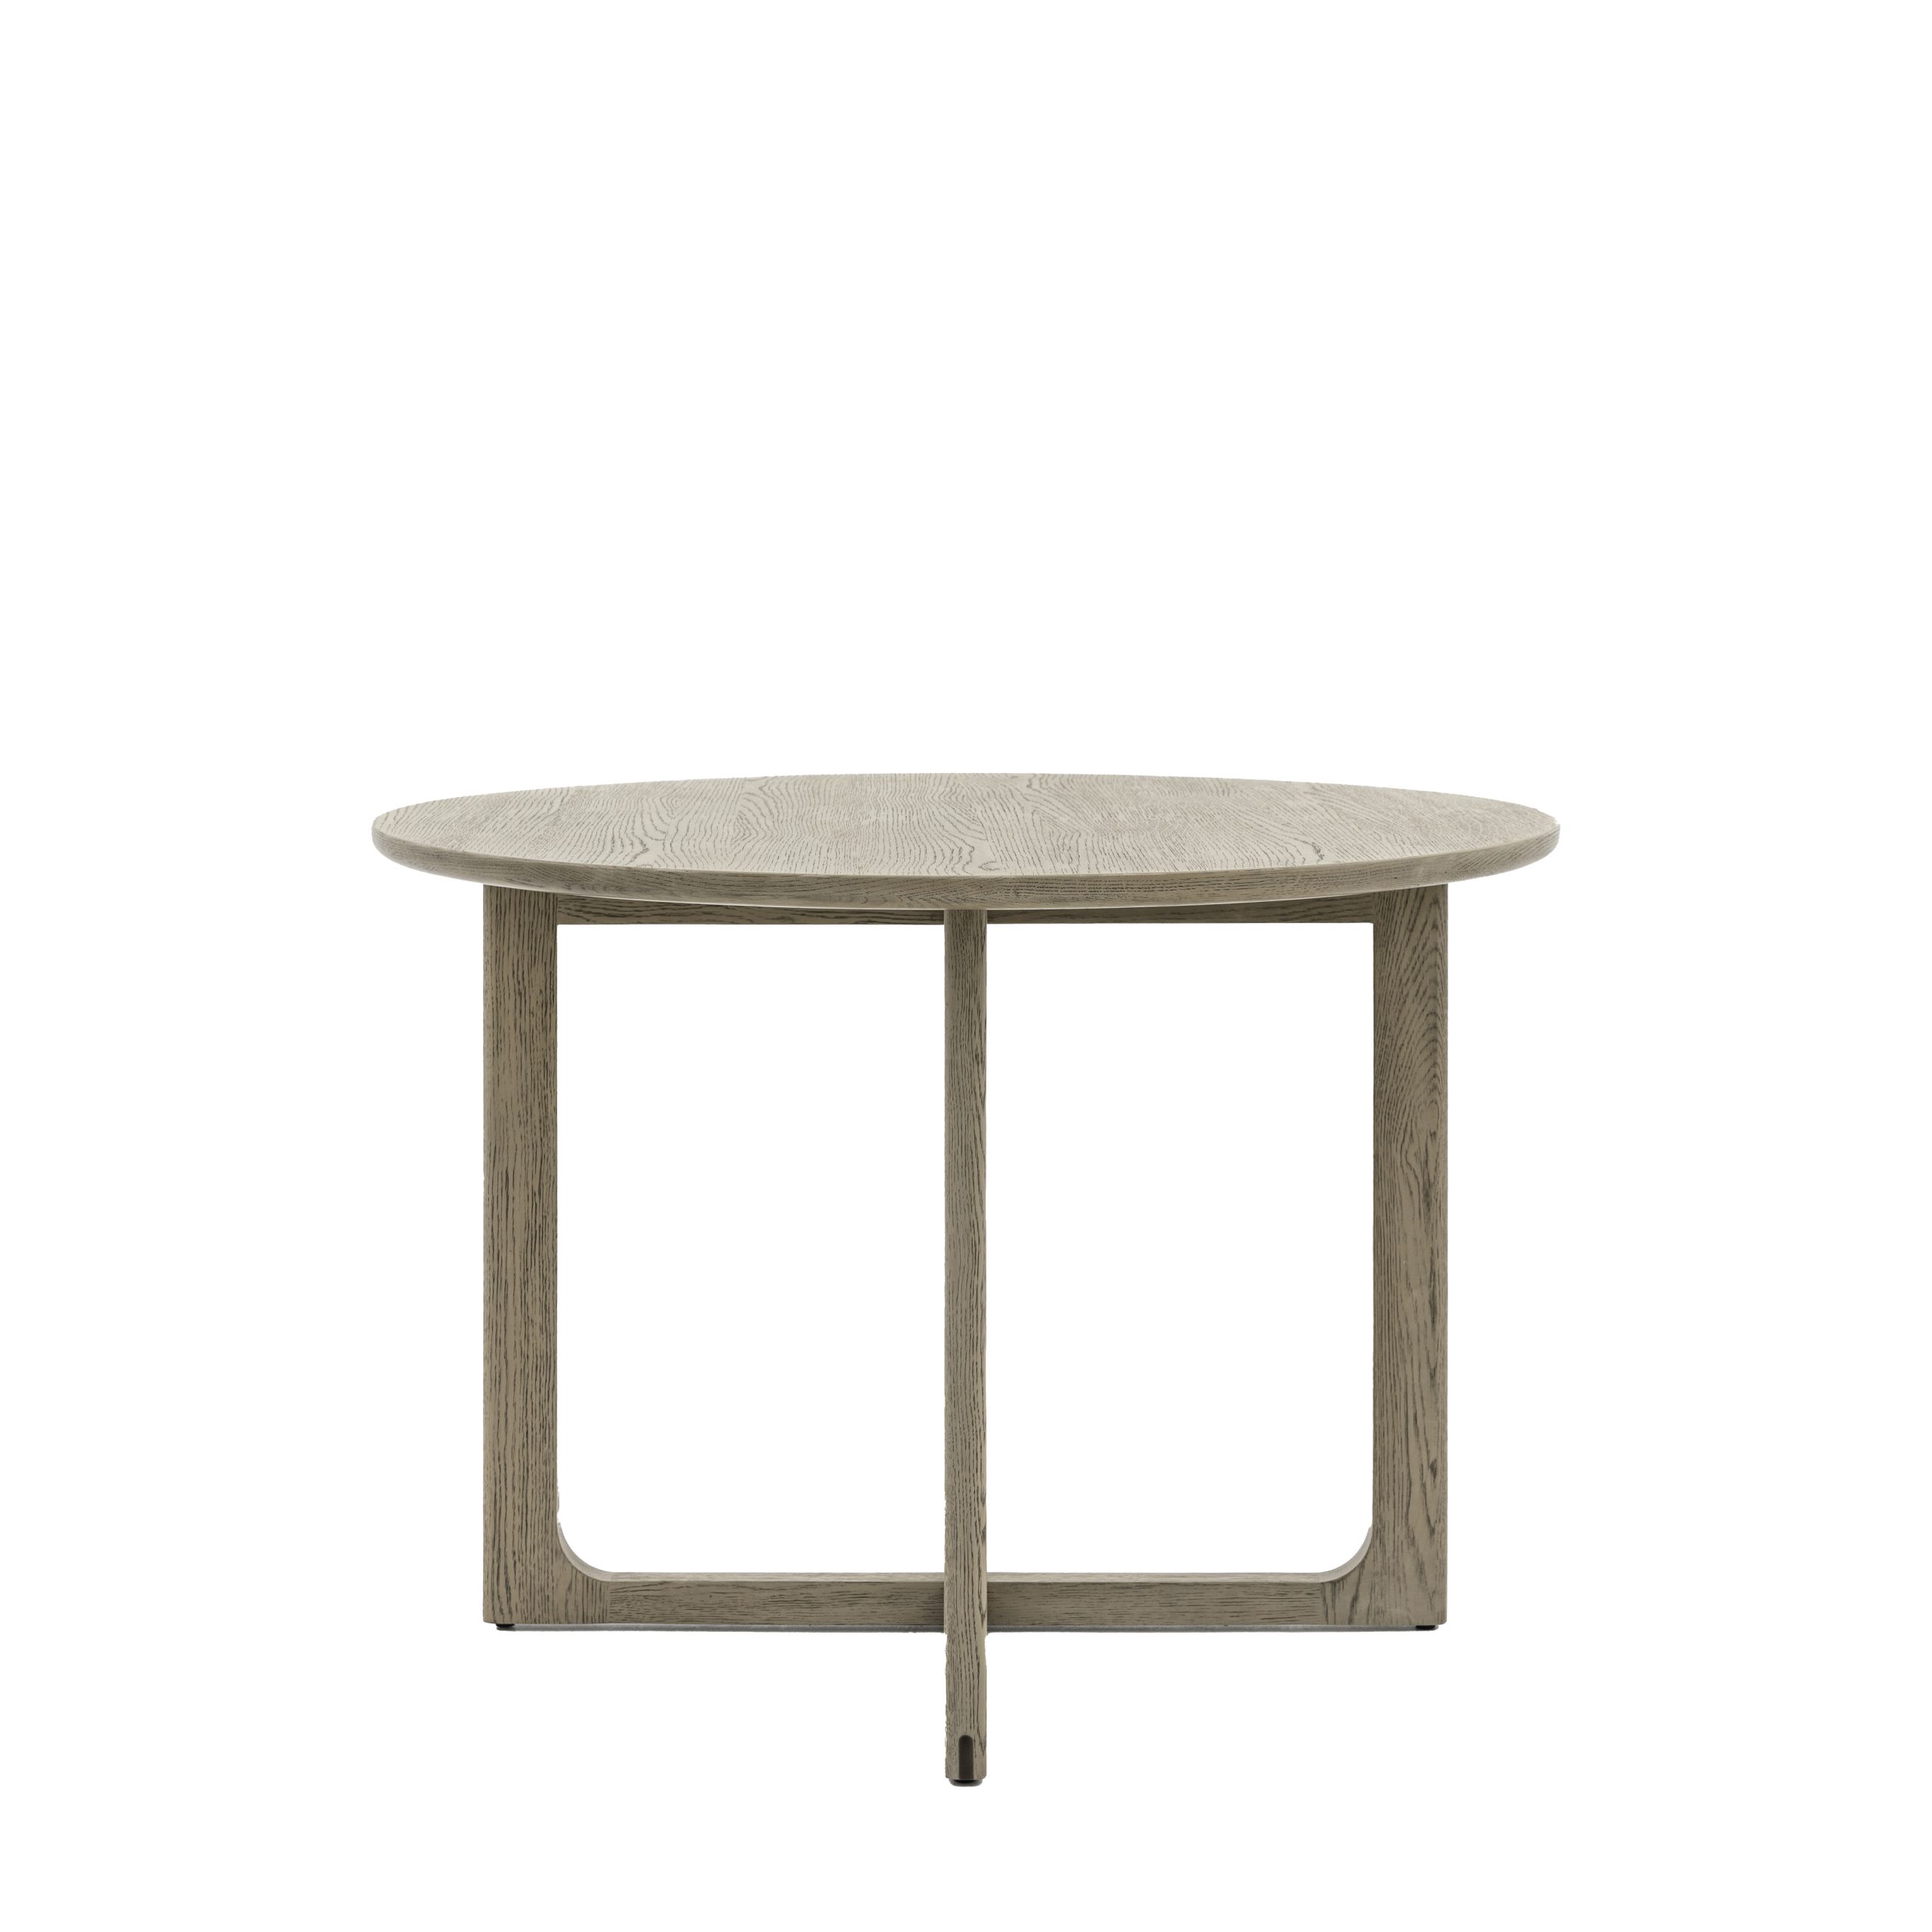 Gallery Direct Craft Round Dining Table Smoked